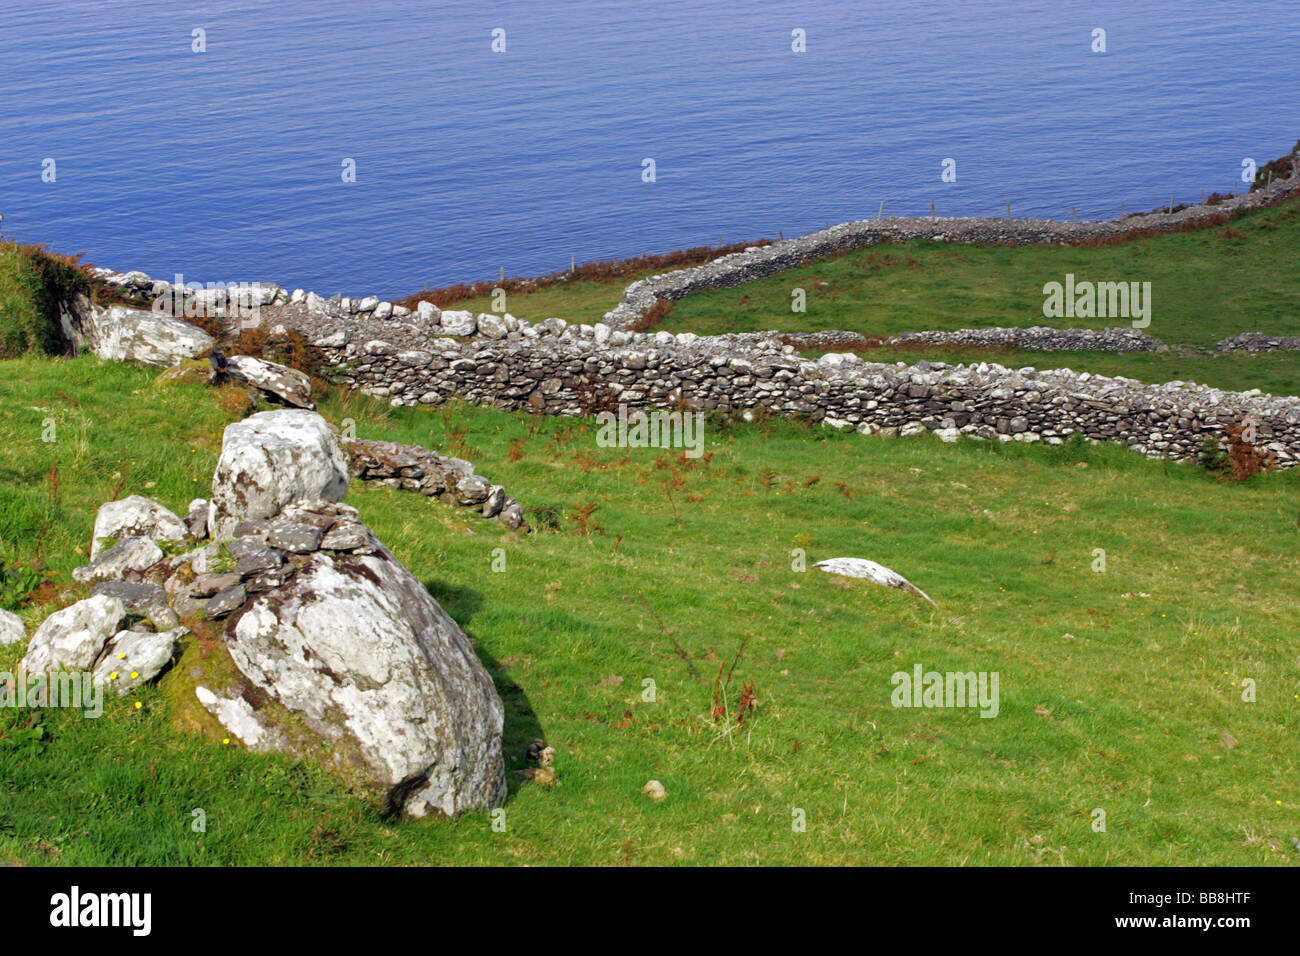 Landscape with stone walls, Ballinskelligs Bay, Waterville, Ring of Kerry, Kerry, Ireland Stock Photo